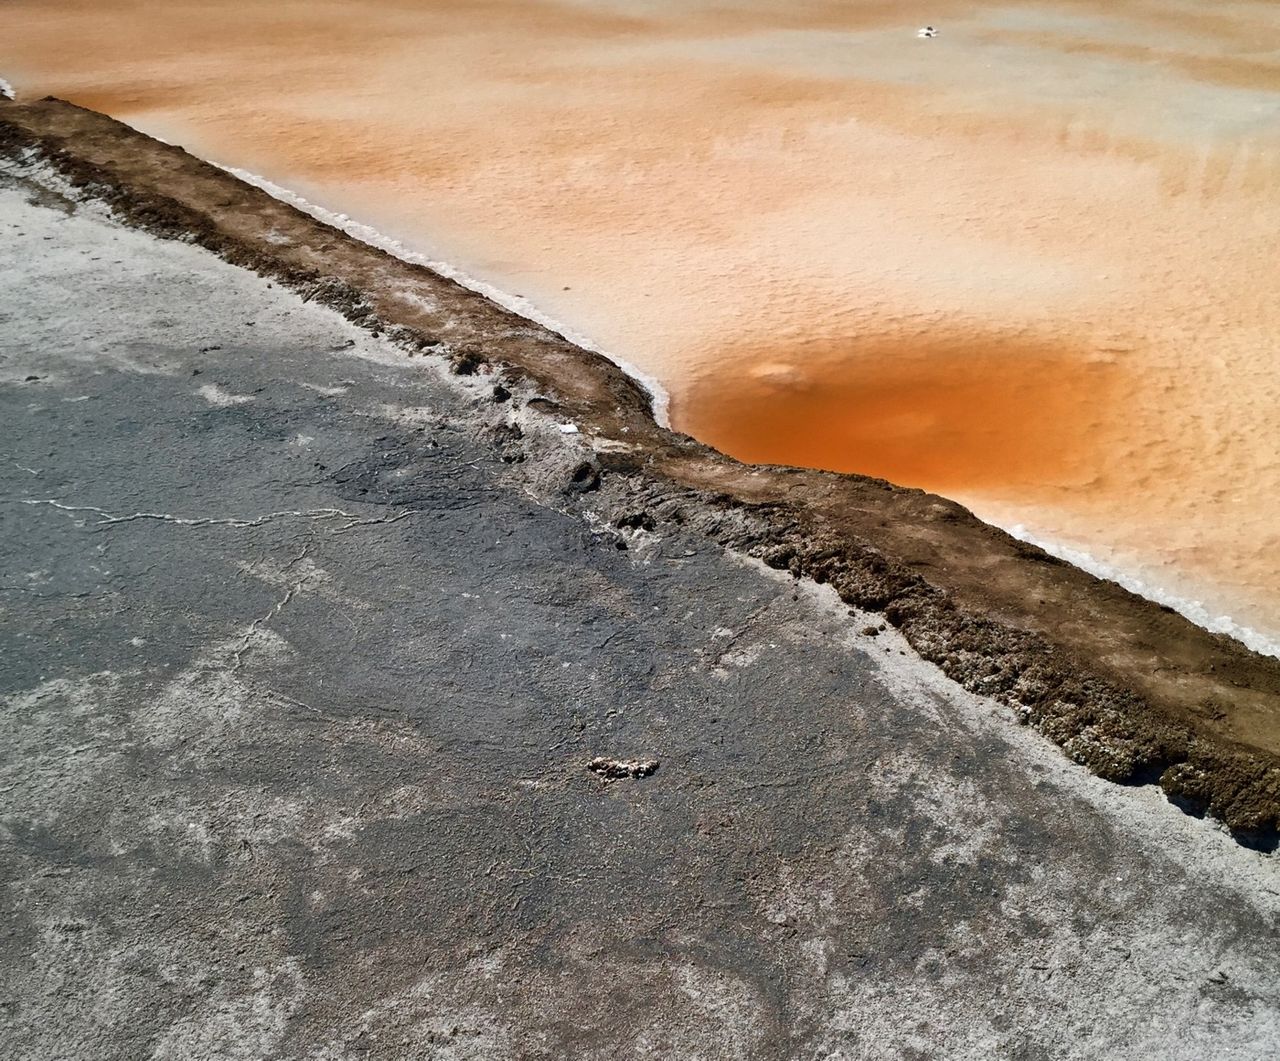 Two pools separated by a path. One is dried grey mud and one is bright orange water with salt.